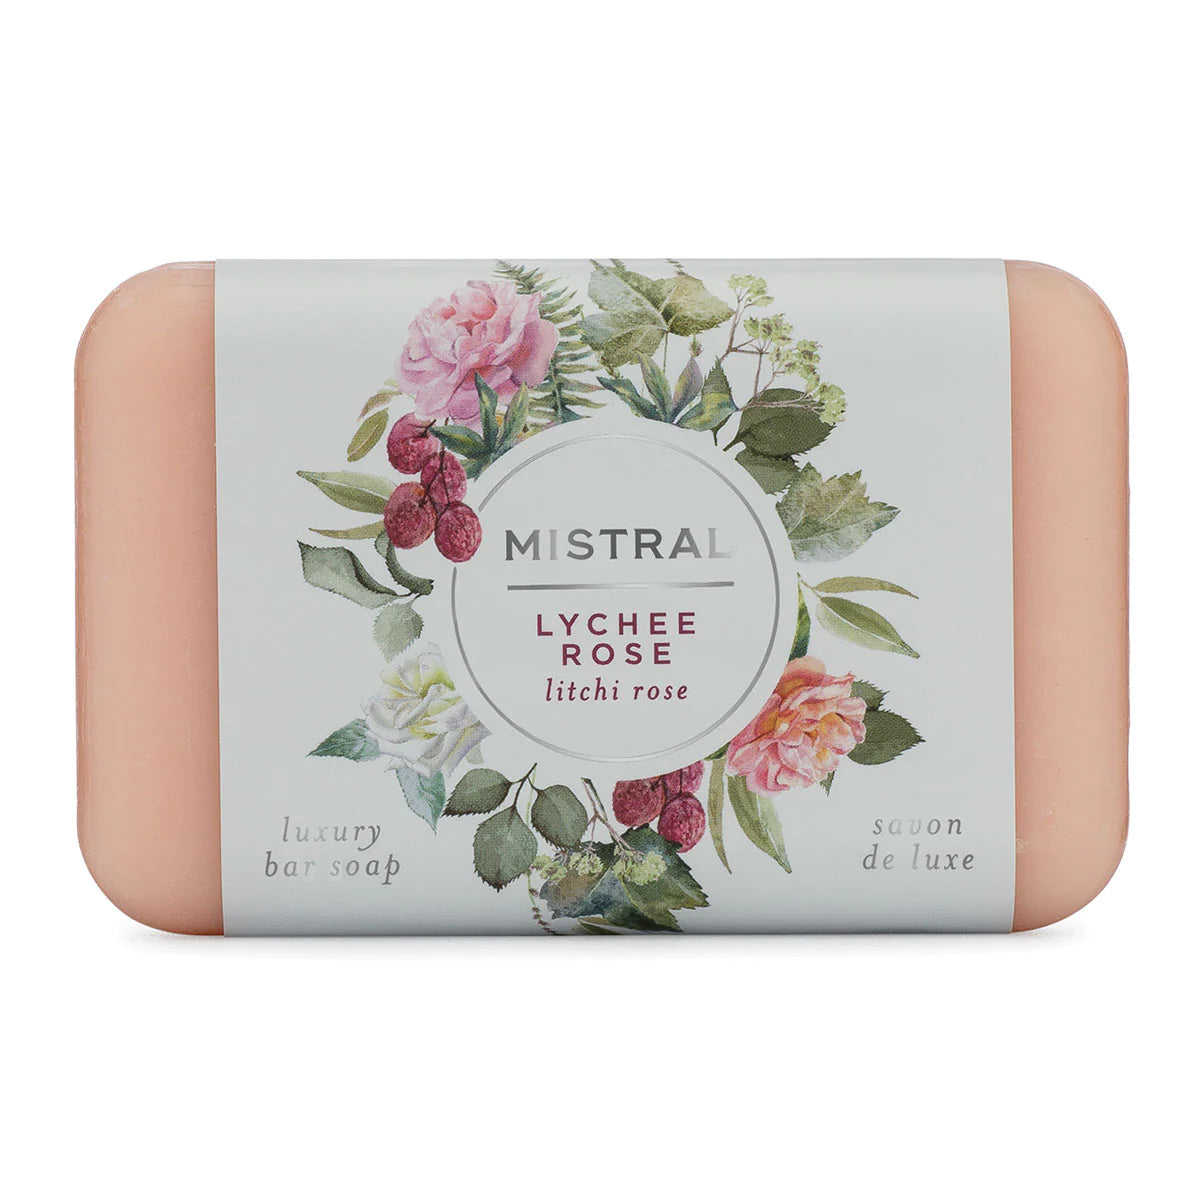 Mistral LYCHEE ROSE CLASSIC BAR SOAP - Women's